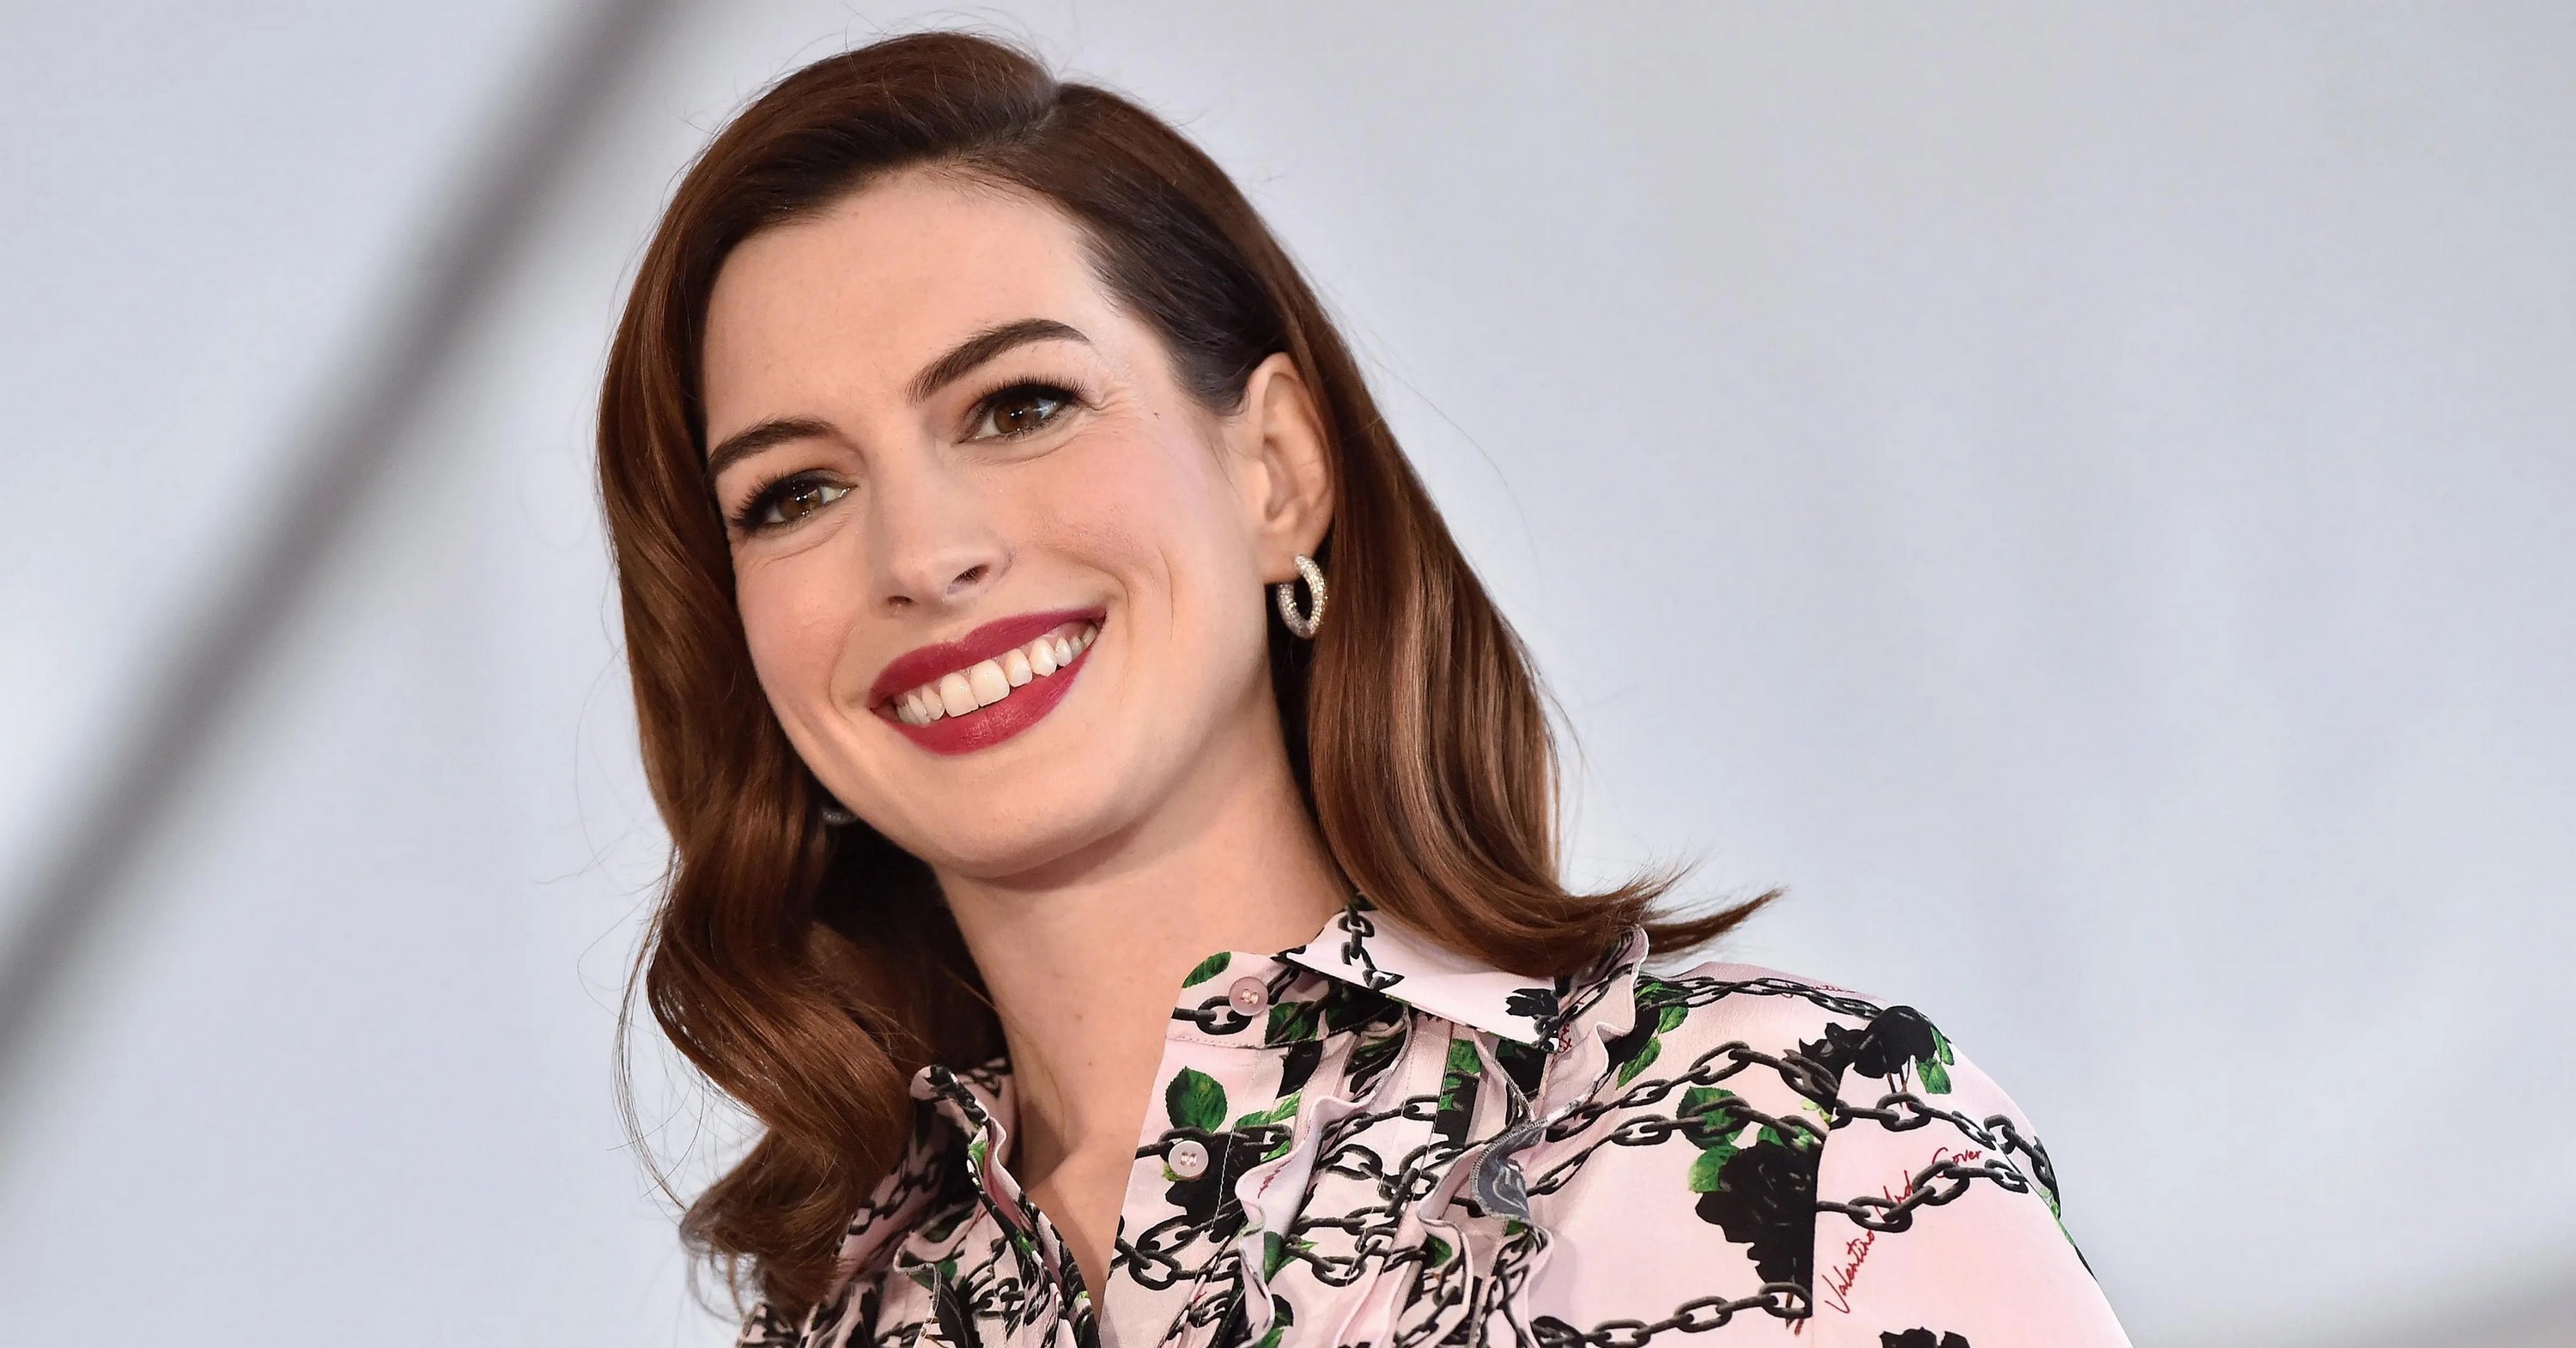 Actress American Anne Hathaway Brown Eyes Brunette Lipstick Smile